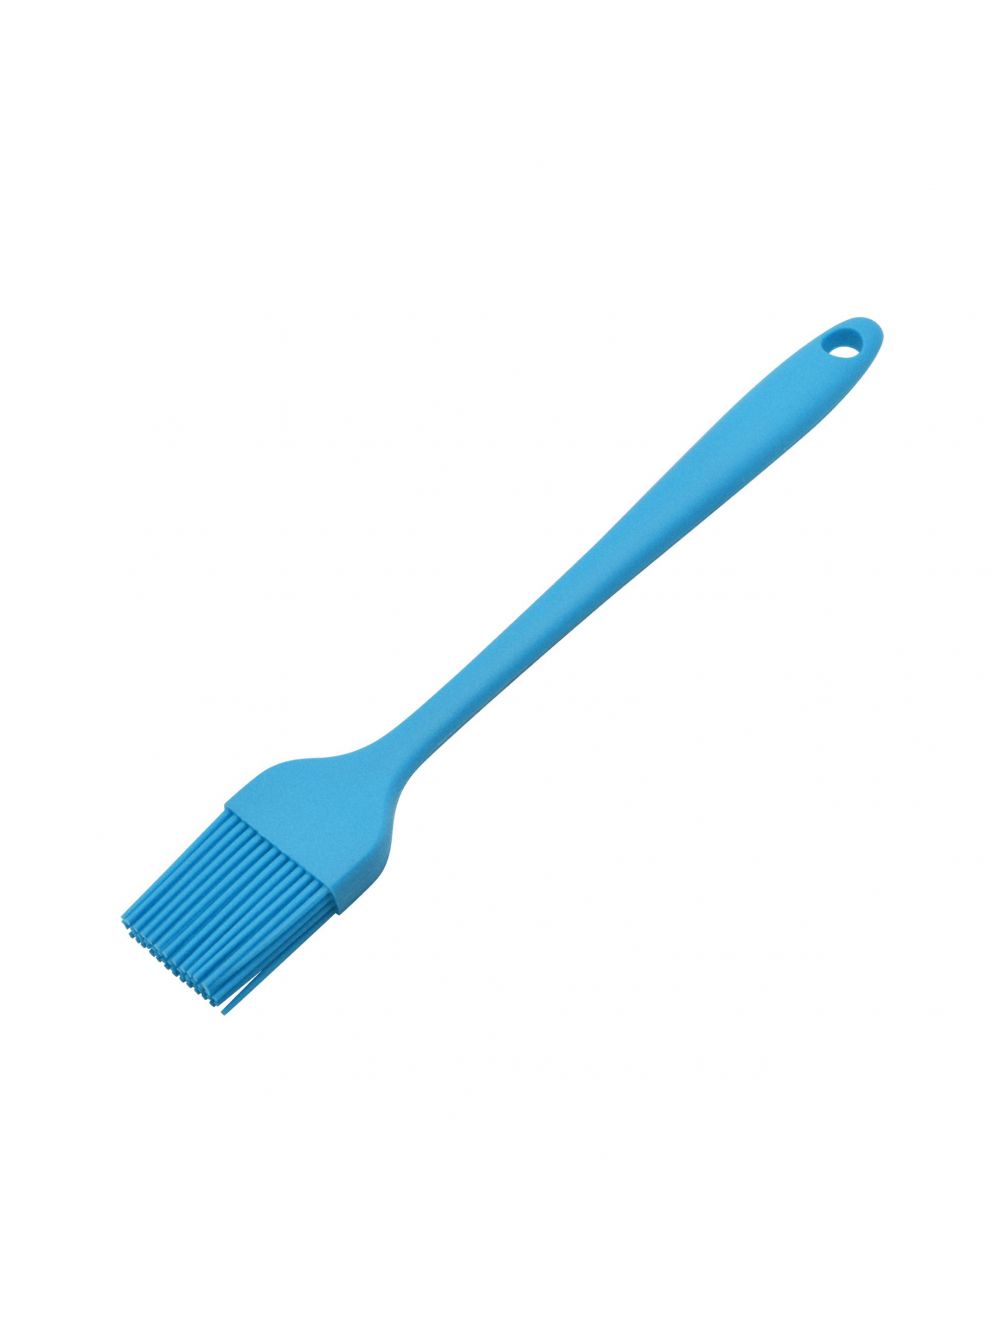 RK Silicon Pastry Brush Size Blue-RNTP22-B